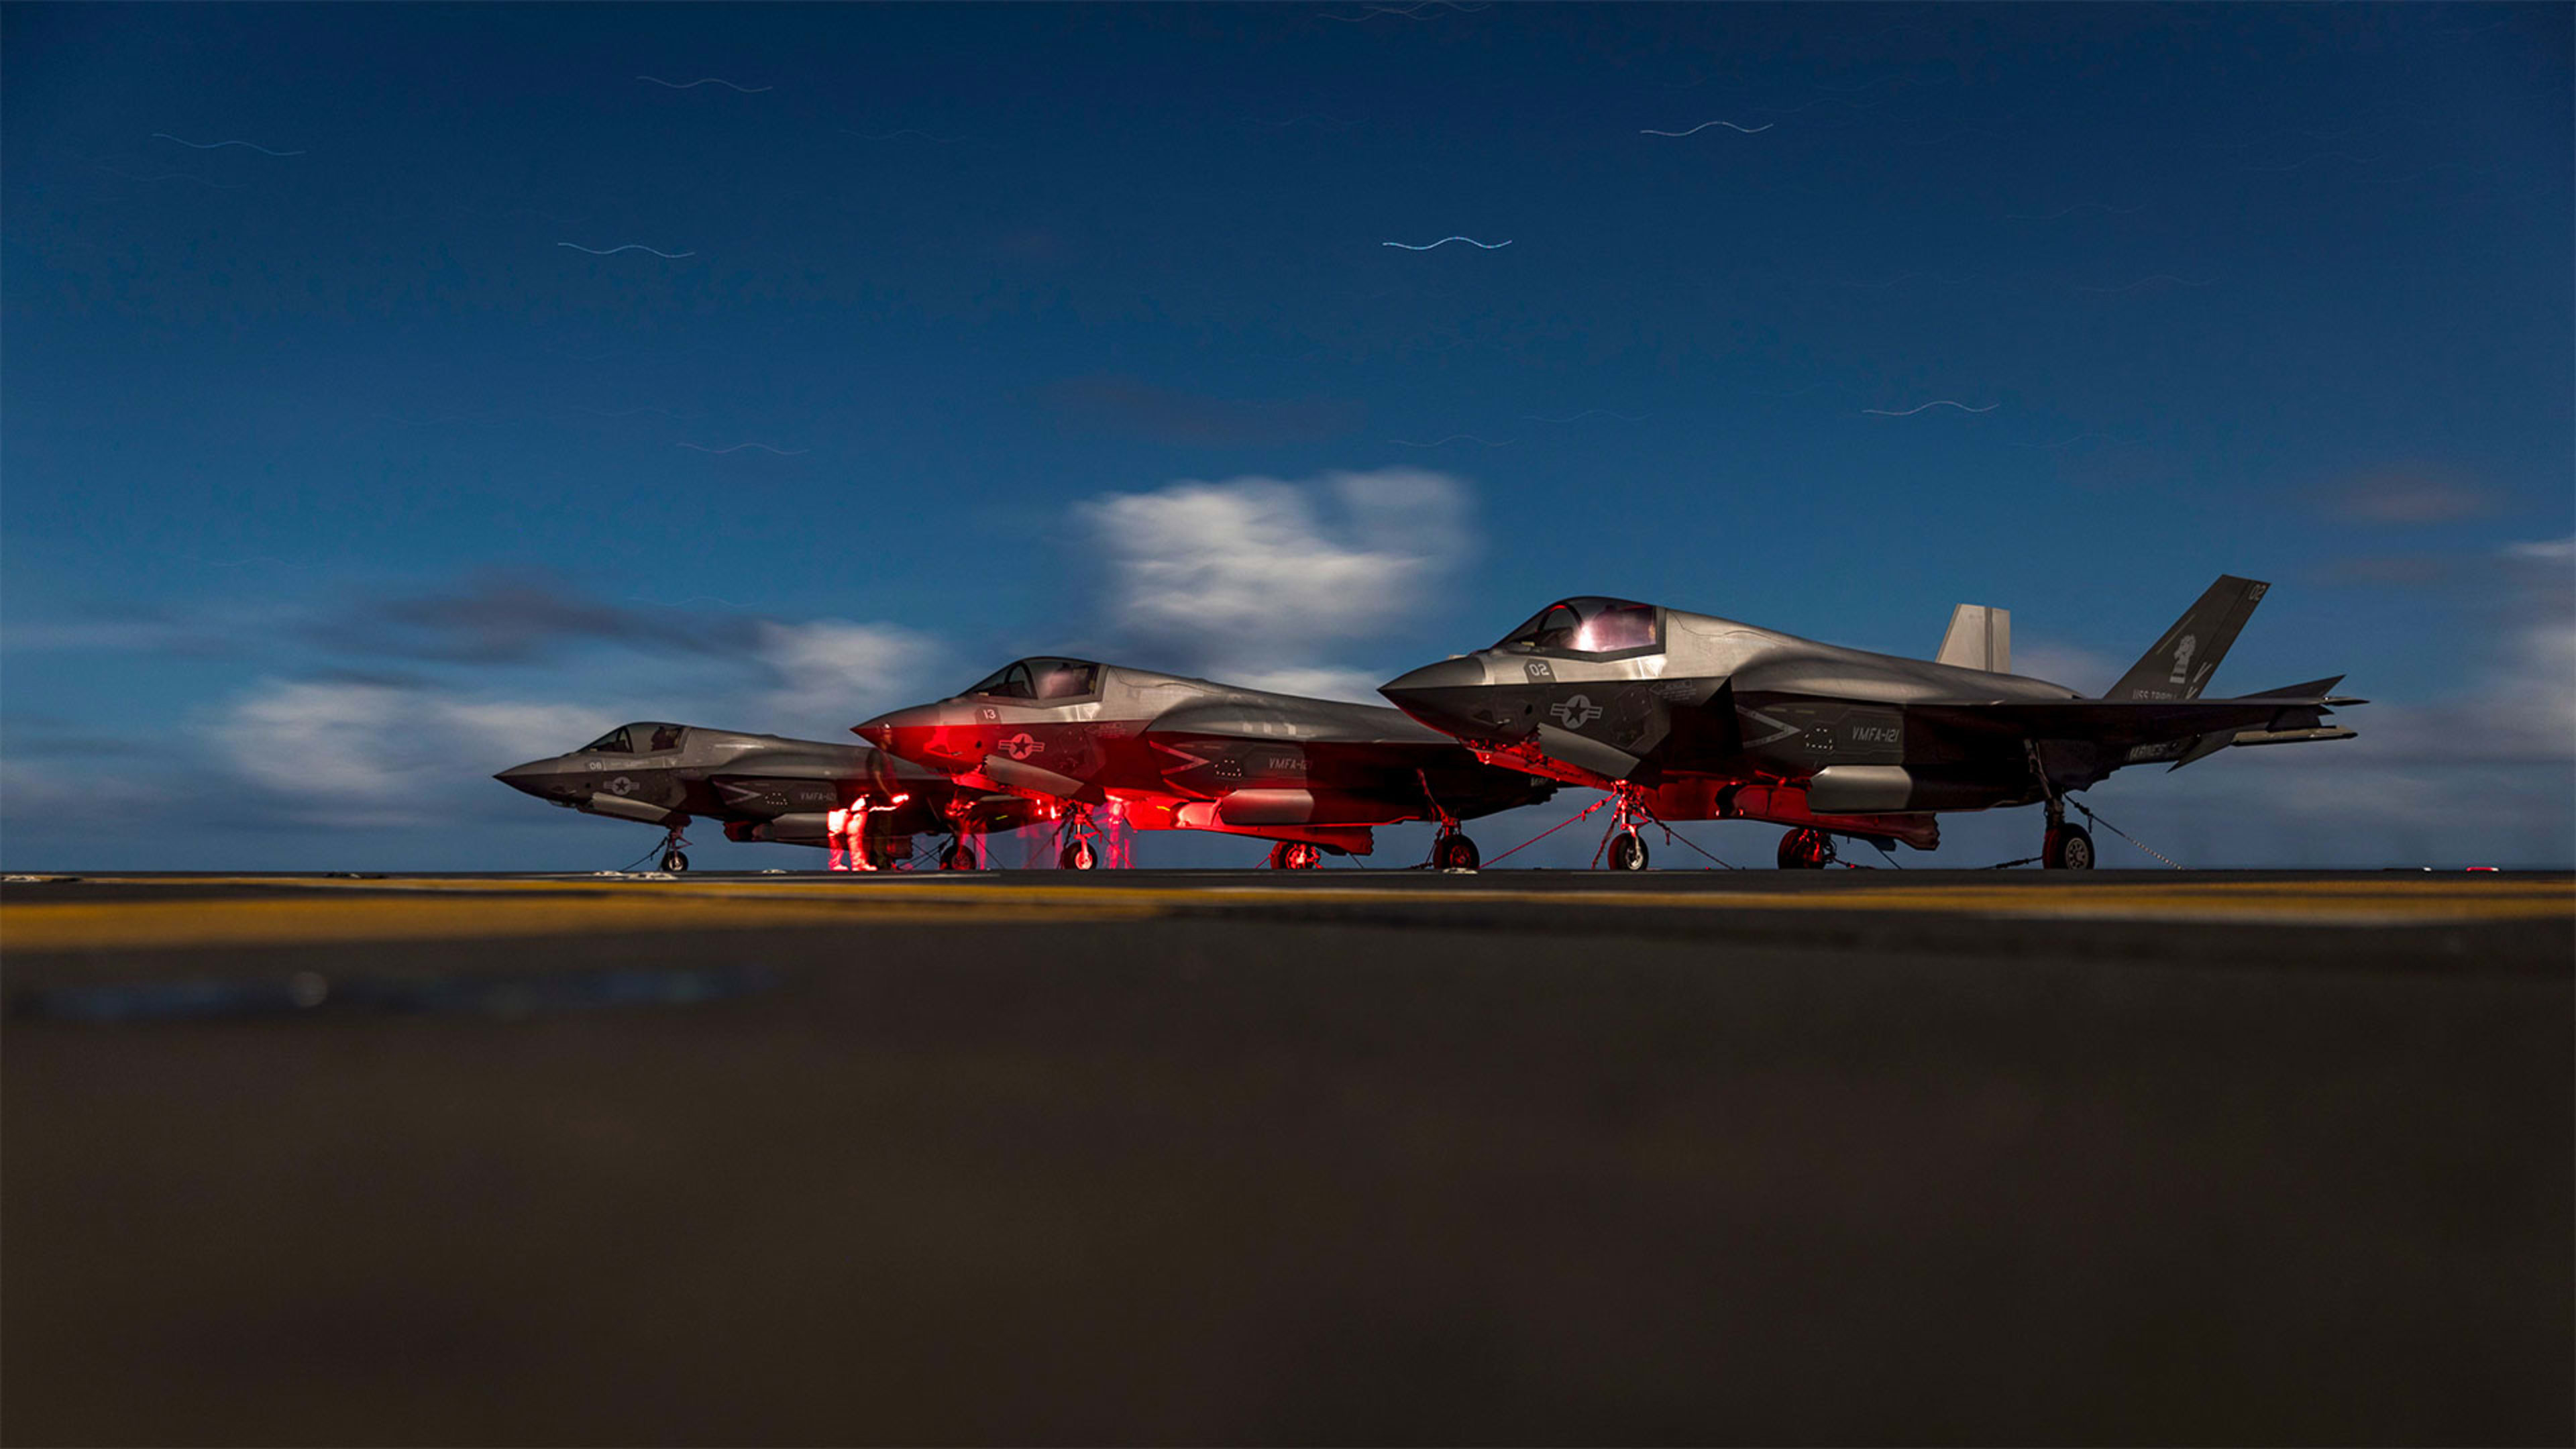 The U.S. military is begging American citizens to help find a missing stealth F-35 fighter jet